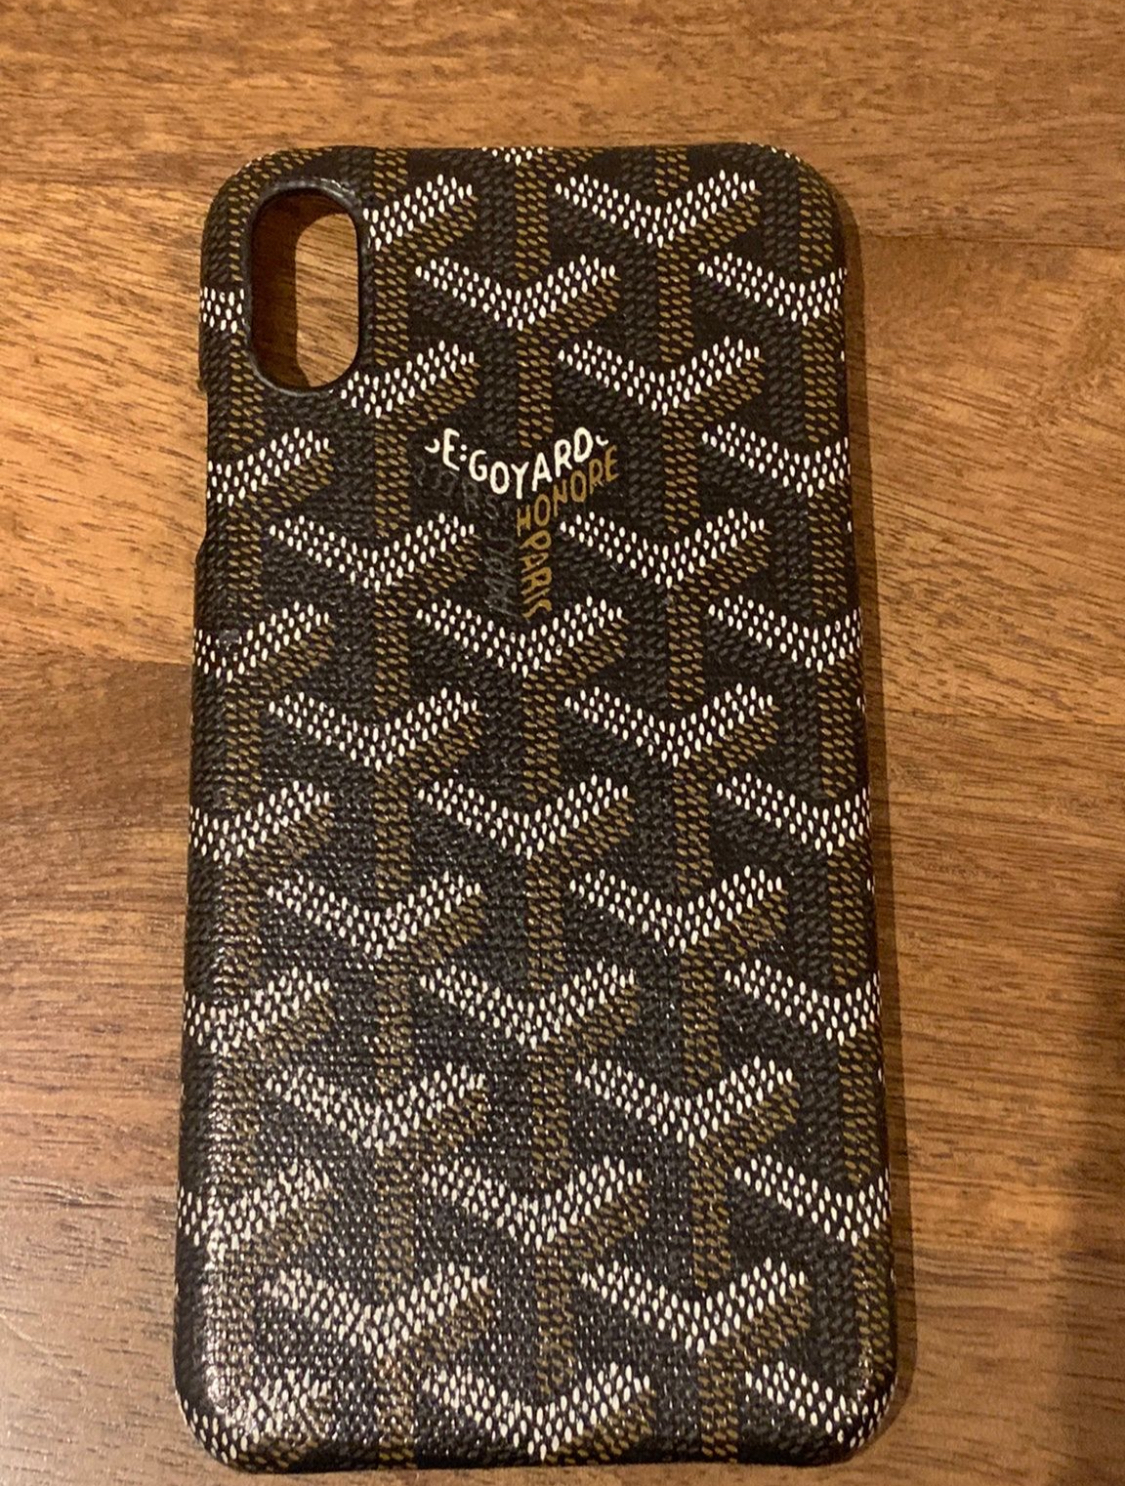 GOYARD IPHONE XS MAX CASE For Sale in 